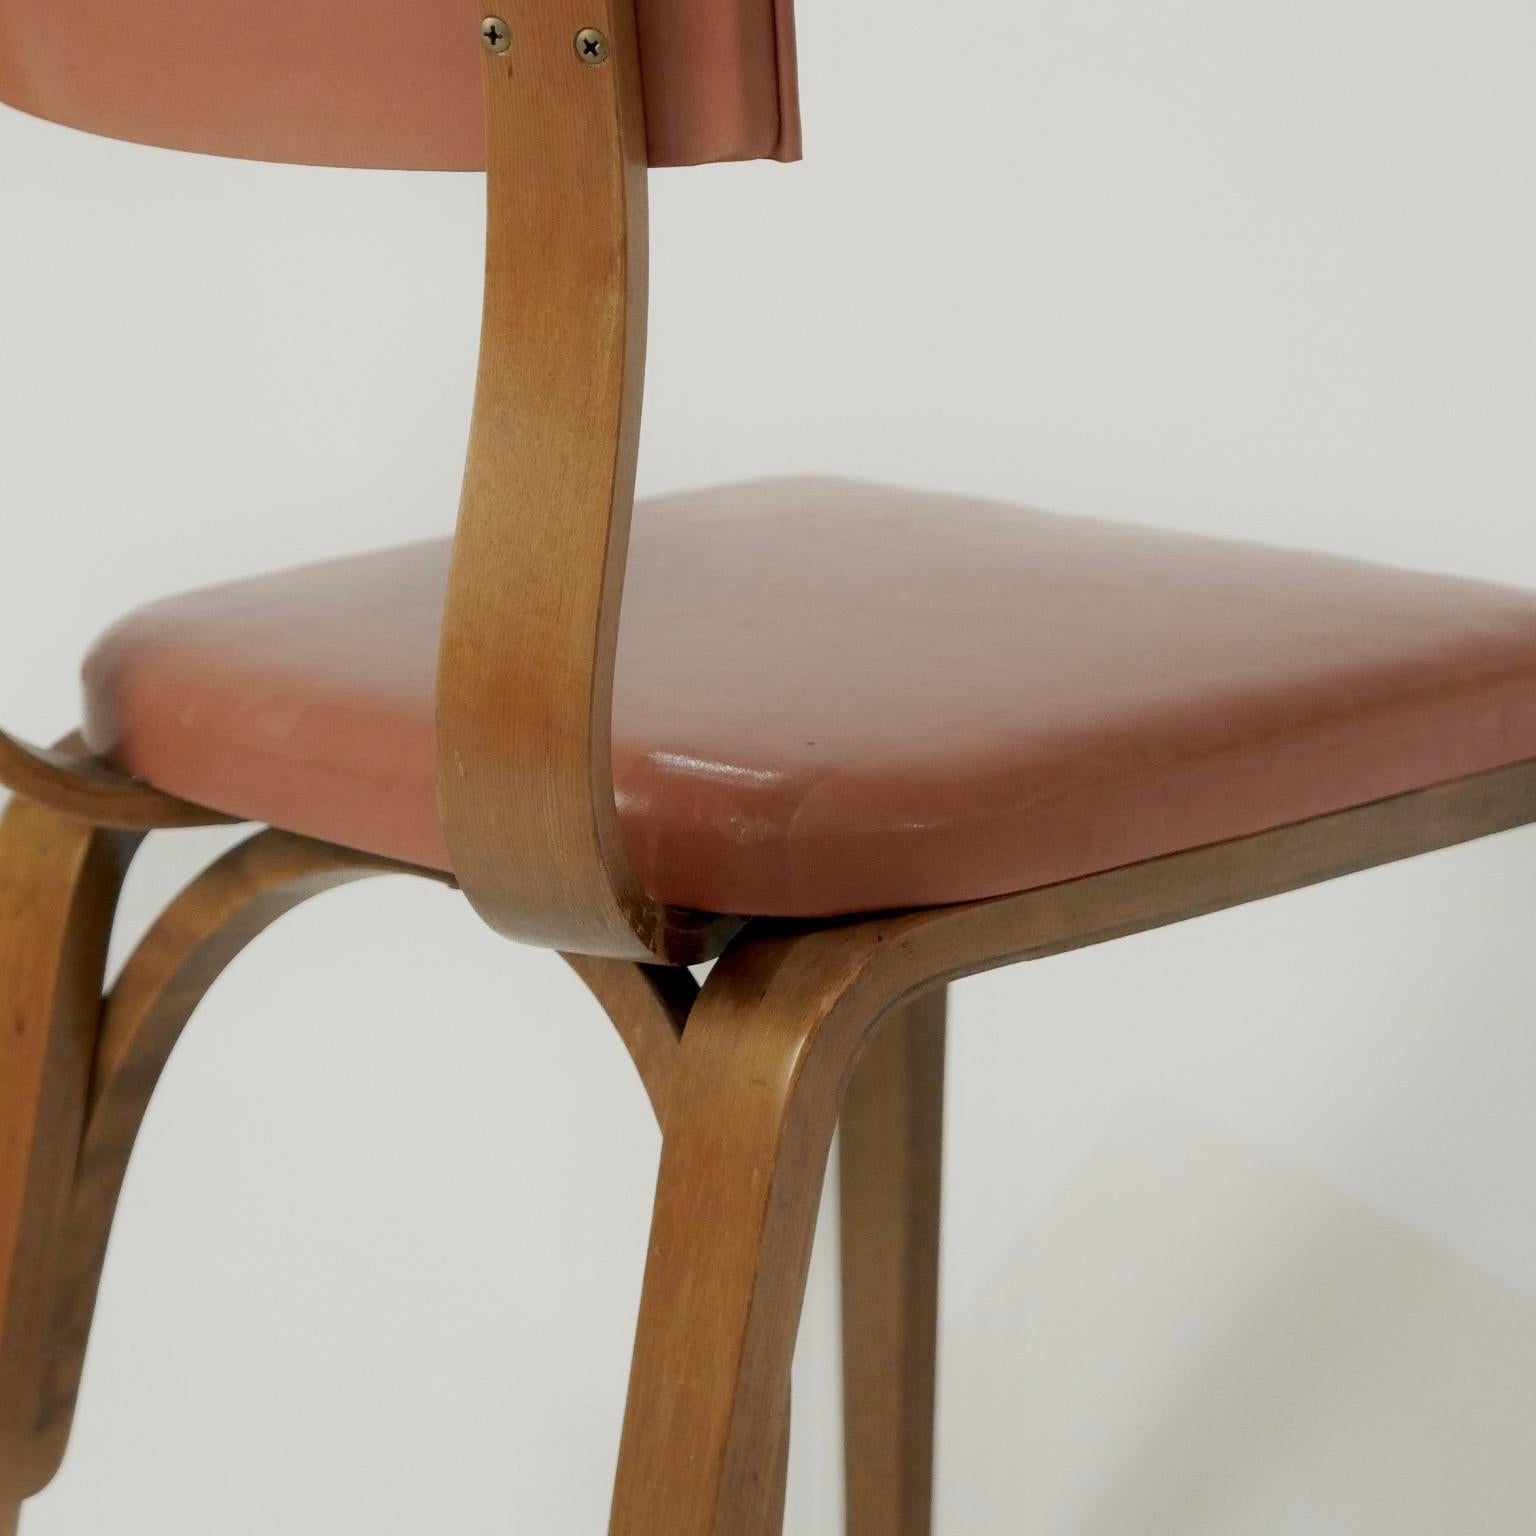 Set of 8 1950s Thonet Padded Bentwood Bent Plywood Dining, Cafe, or Desk Chairs  (Österreichisch)